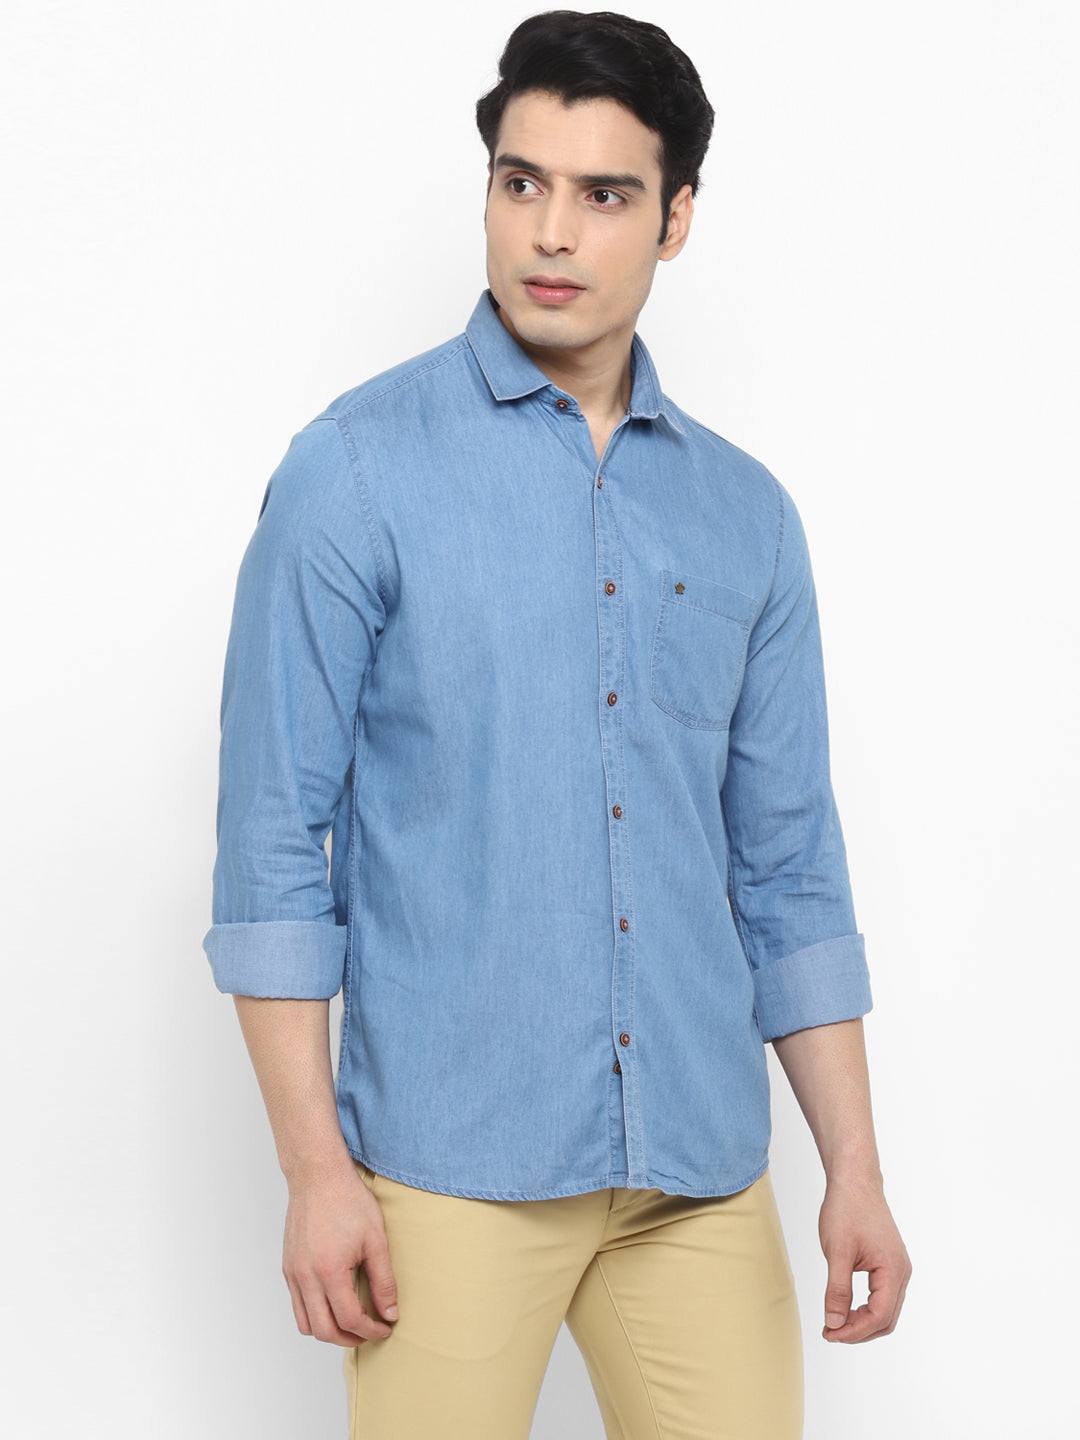 Solid Blue Slim Fit Casual Shirt For Men